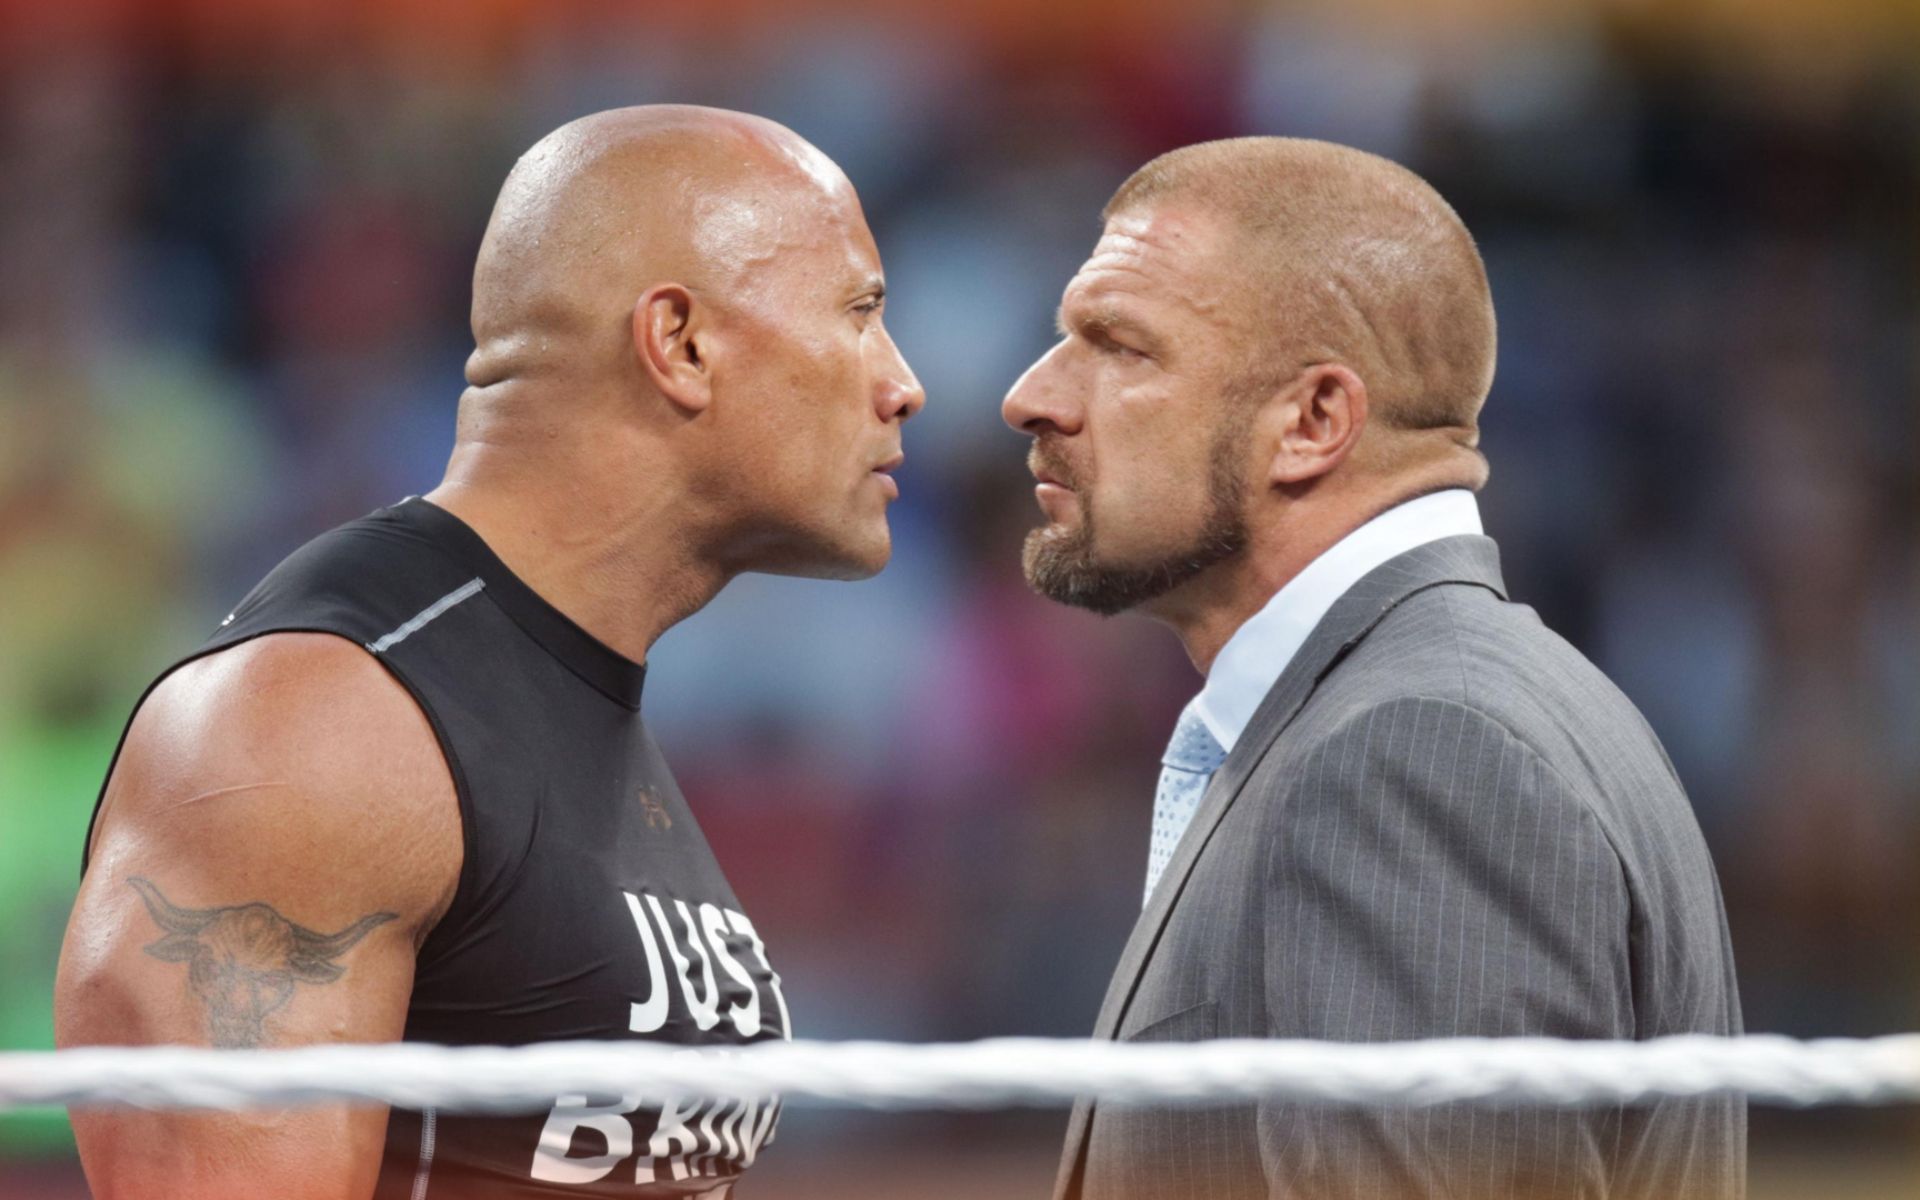 WWE Superstars, The Rock, and Triple H